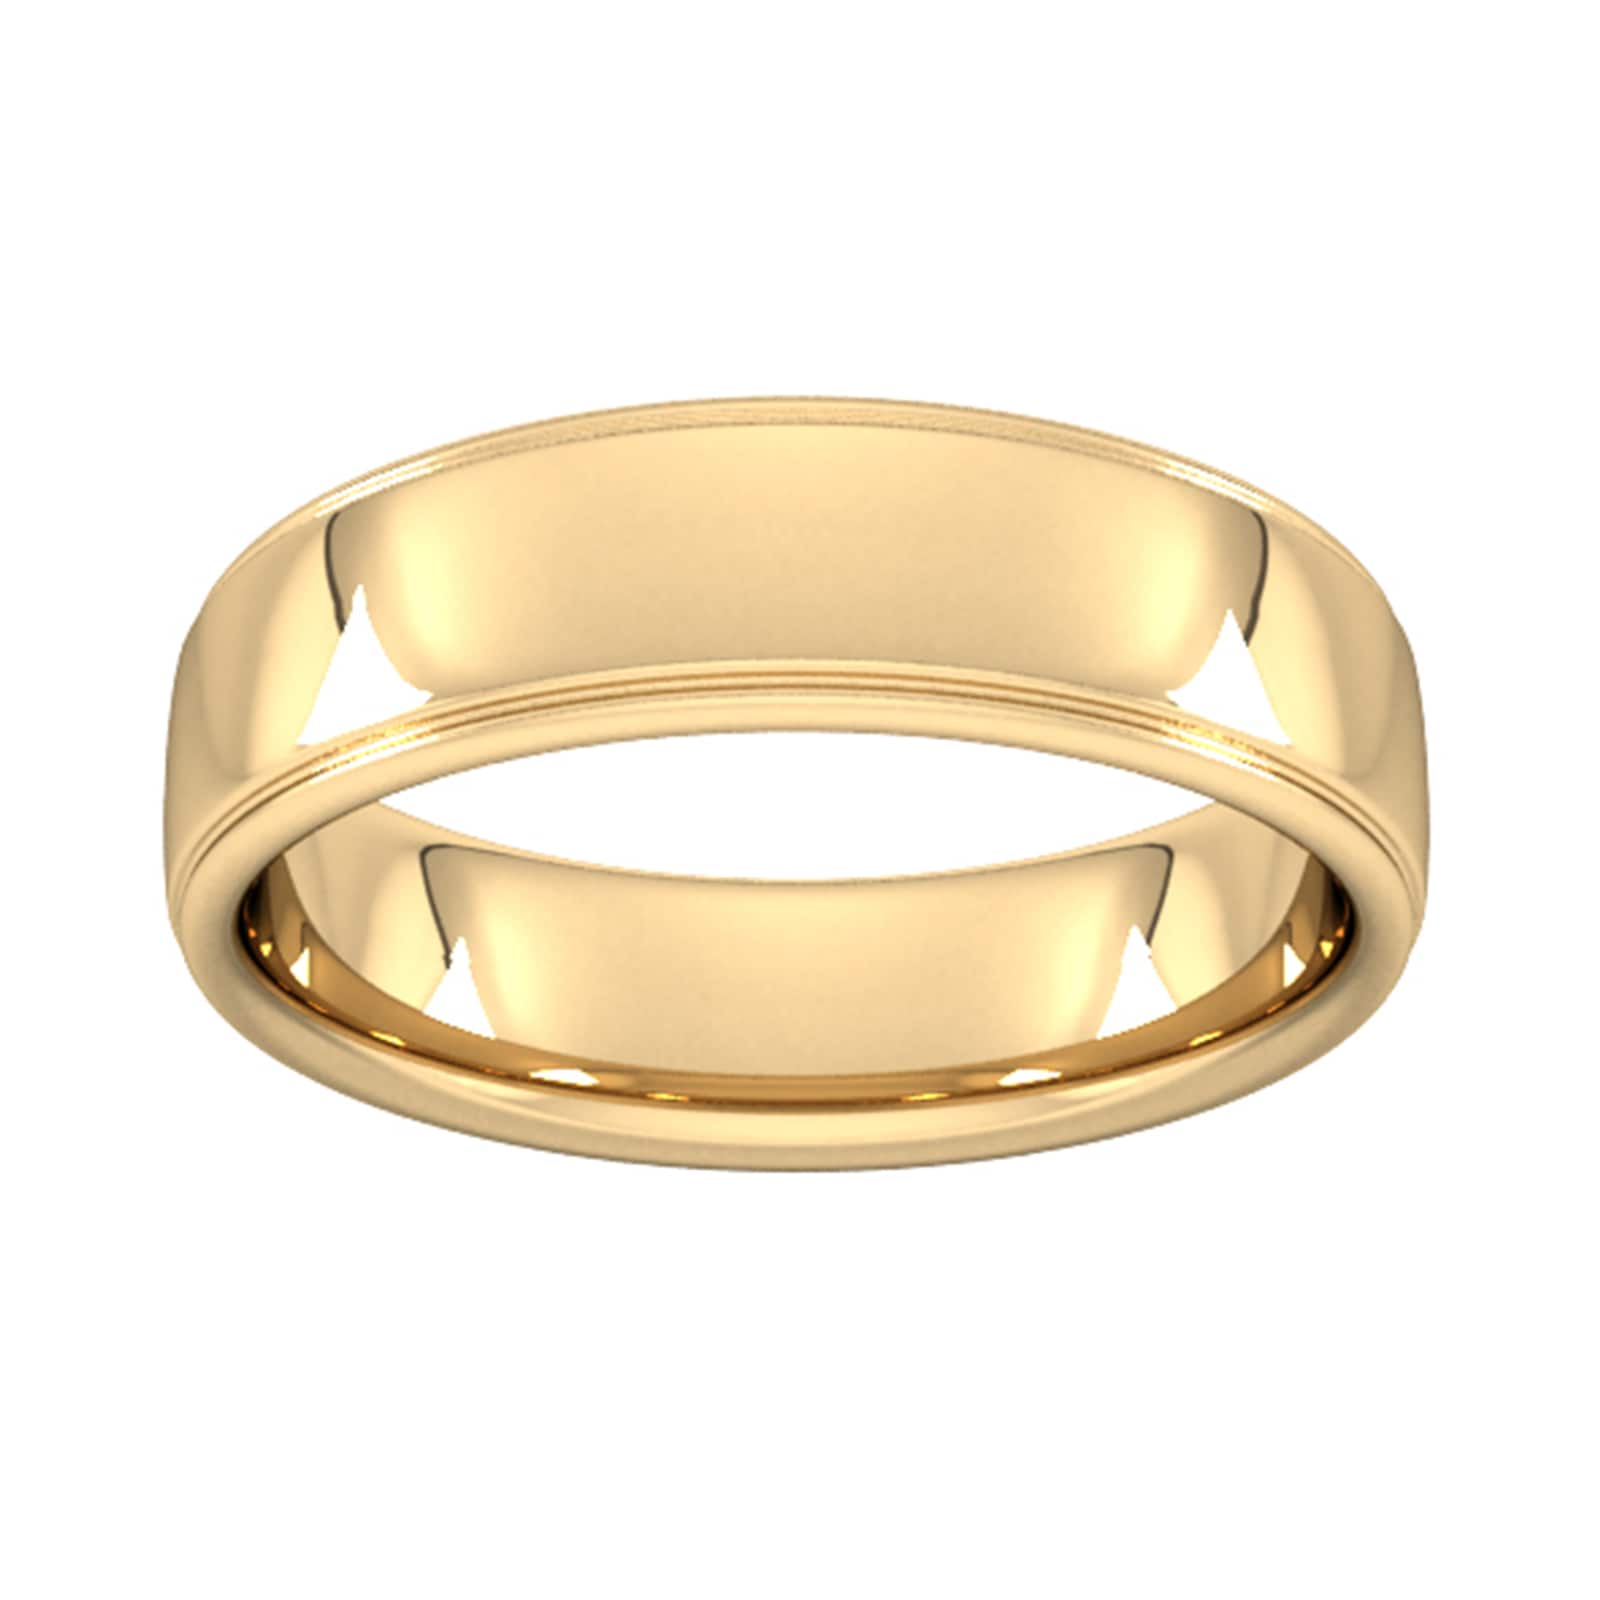 6mm Slight Court Extra Heavy Polished Finish With Grooves Wedding Ring In 9 Carat Yellow Gold - Ring Size O